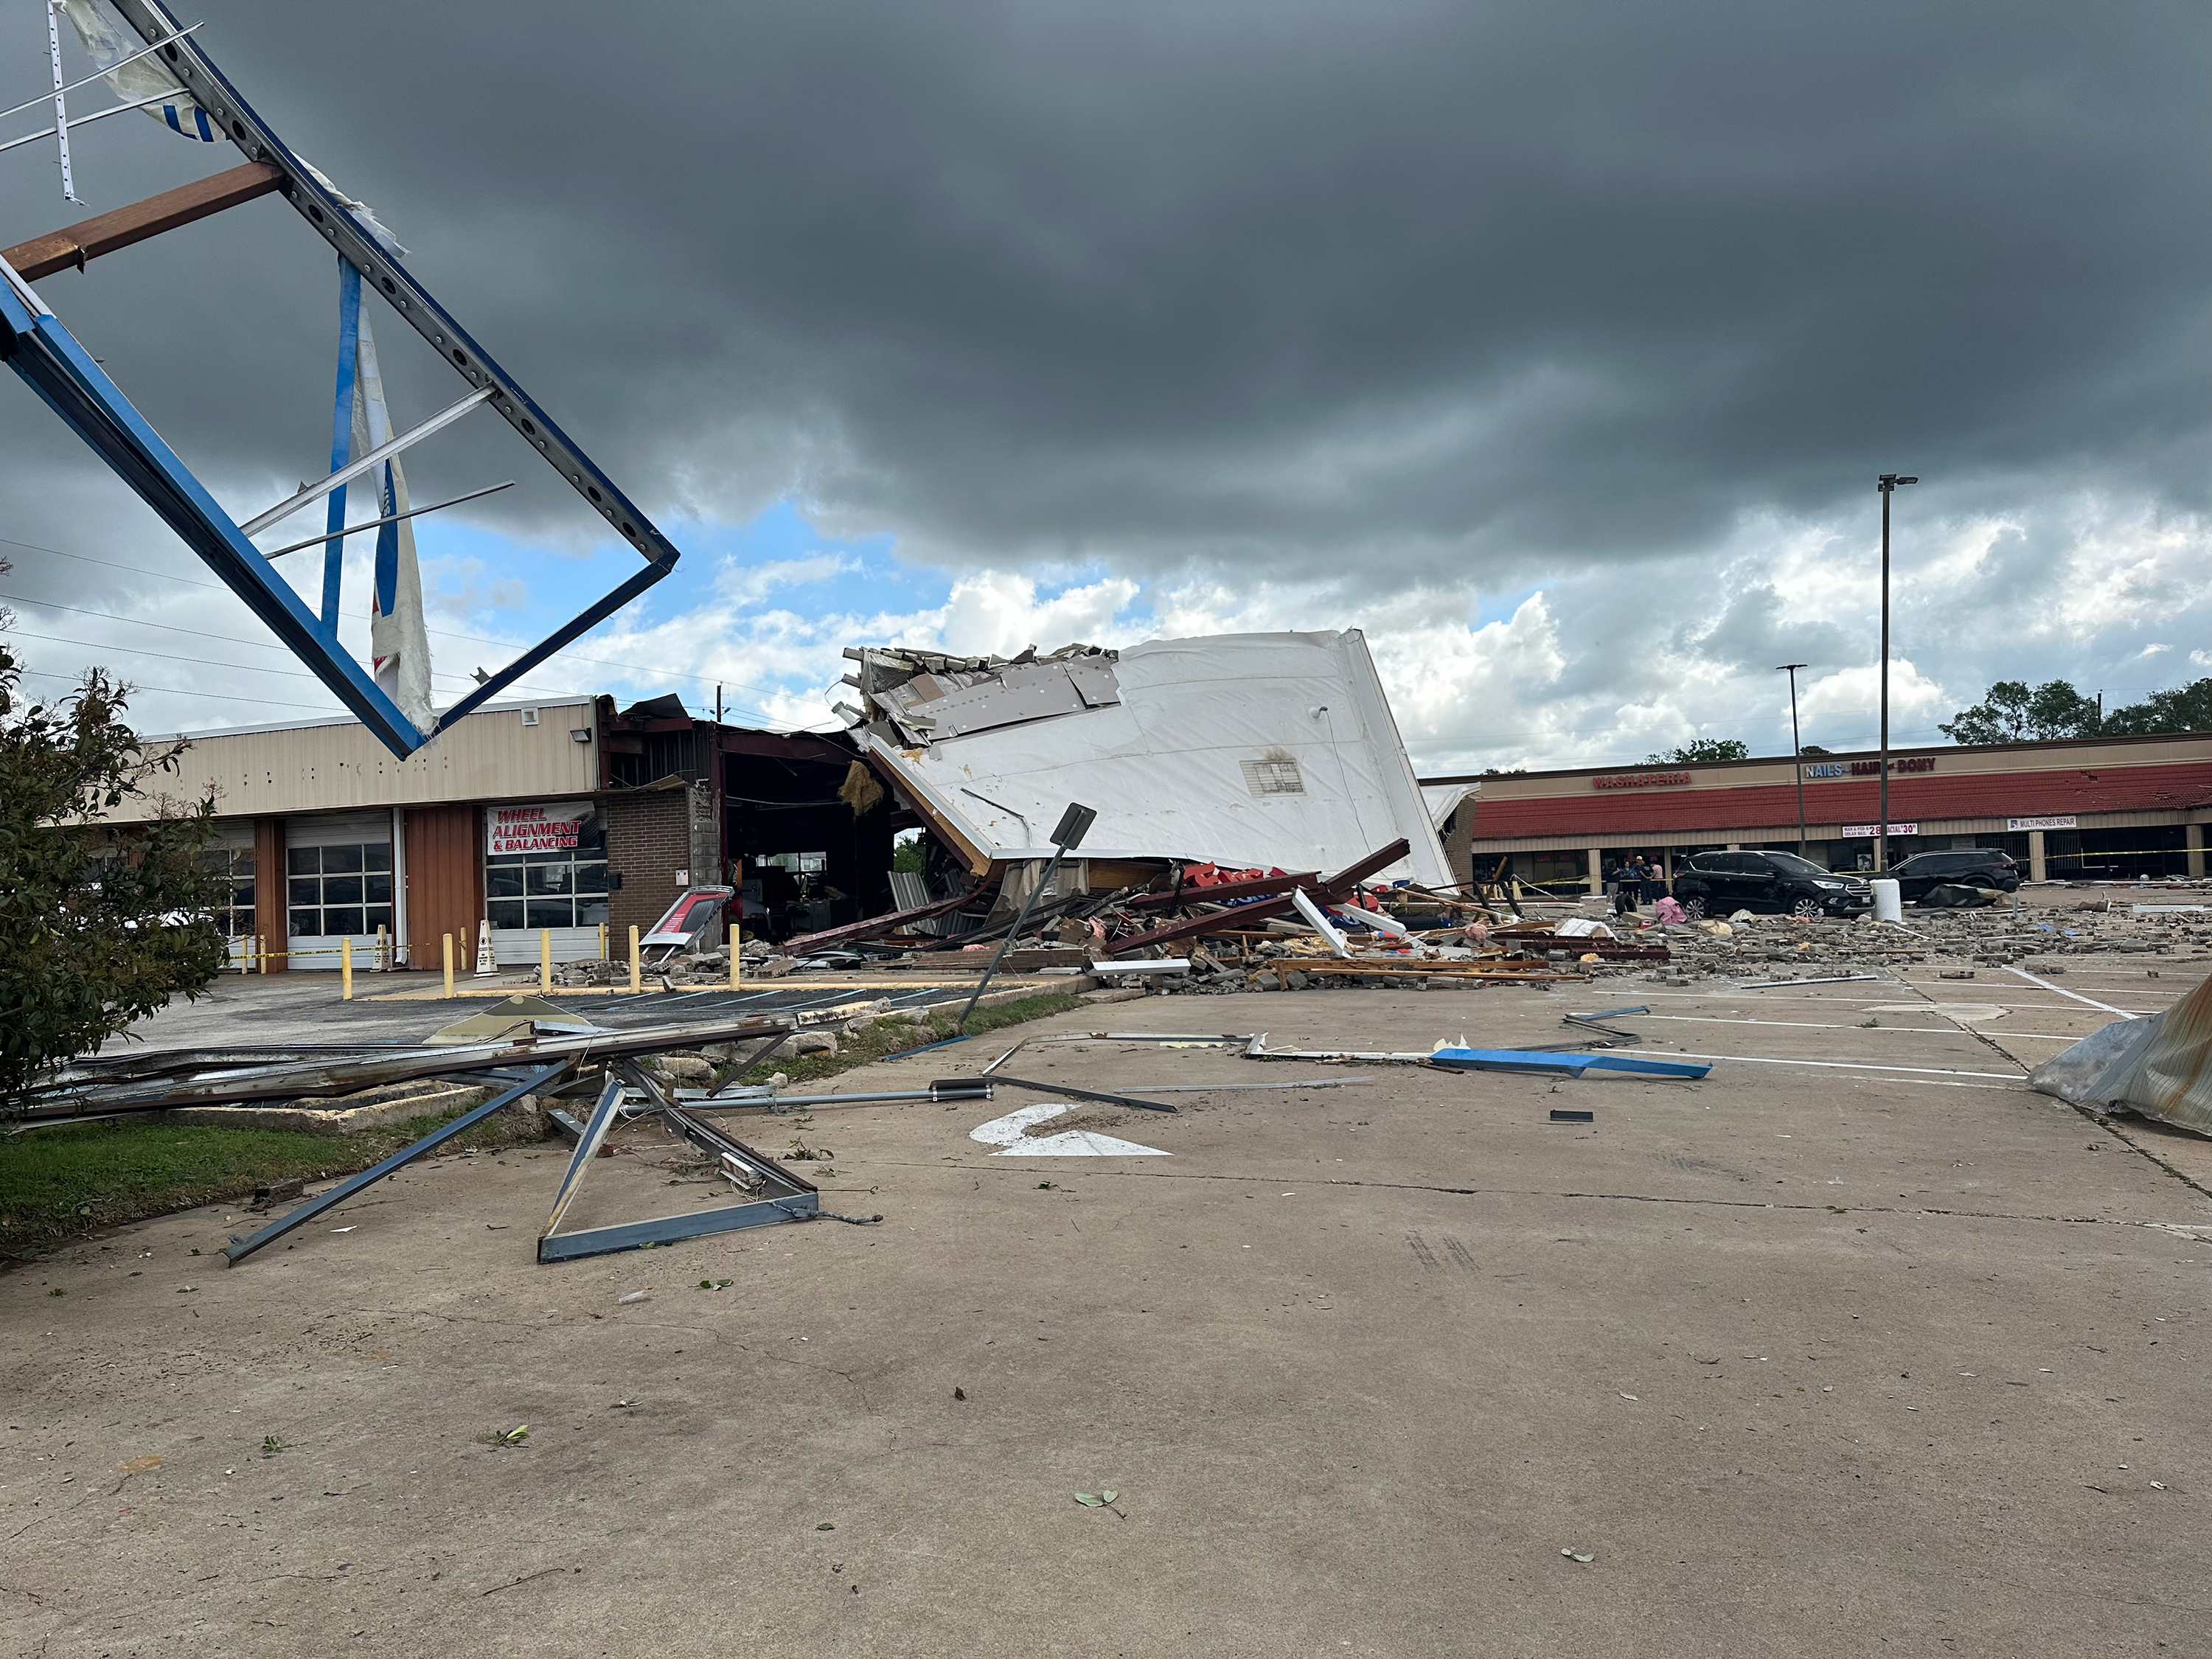 Storm damage is seen in Katy, Texas, on Wednesday.